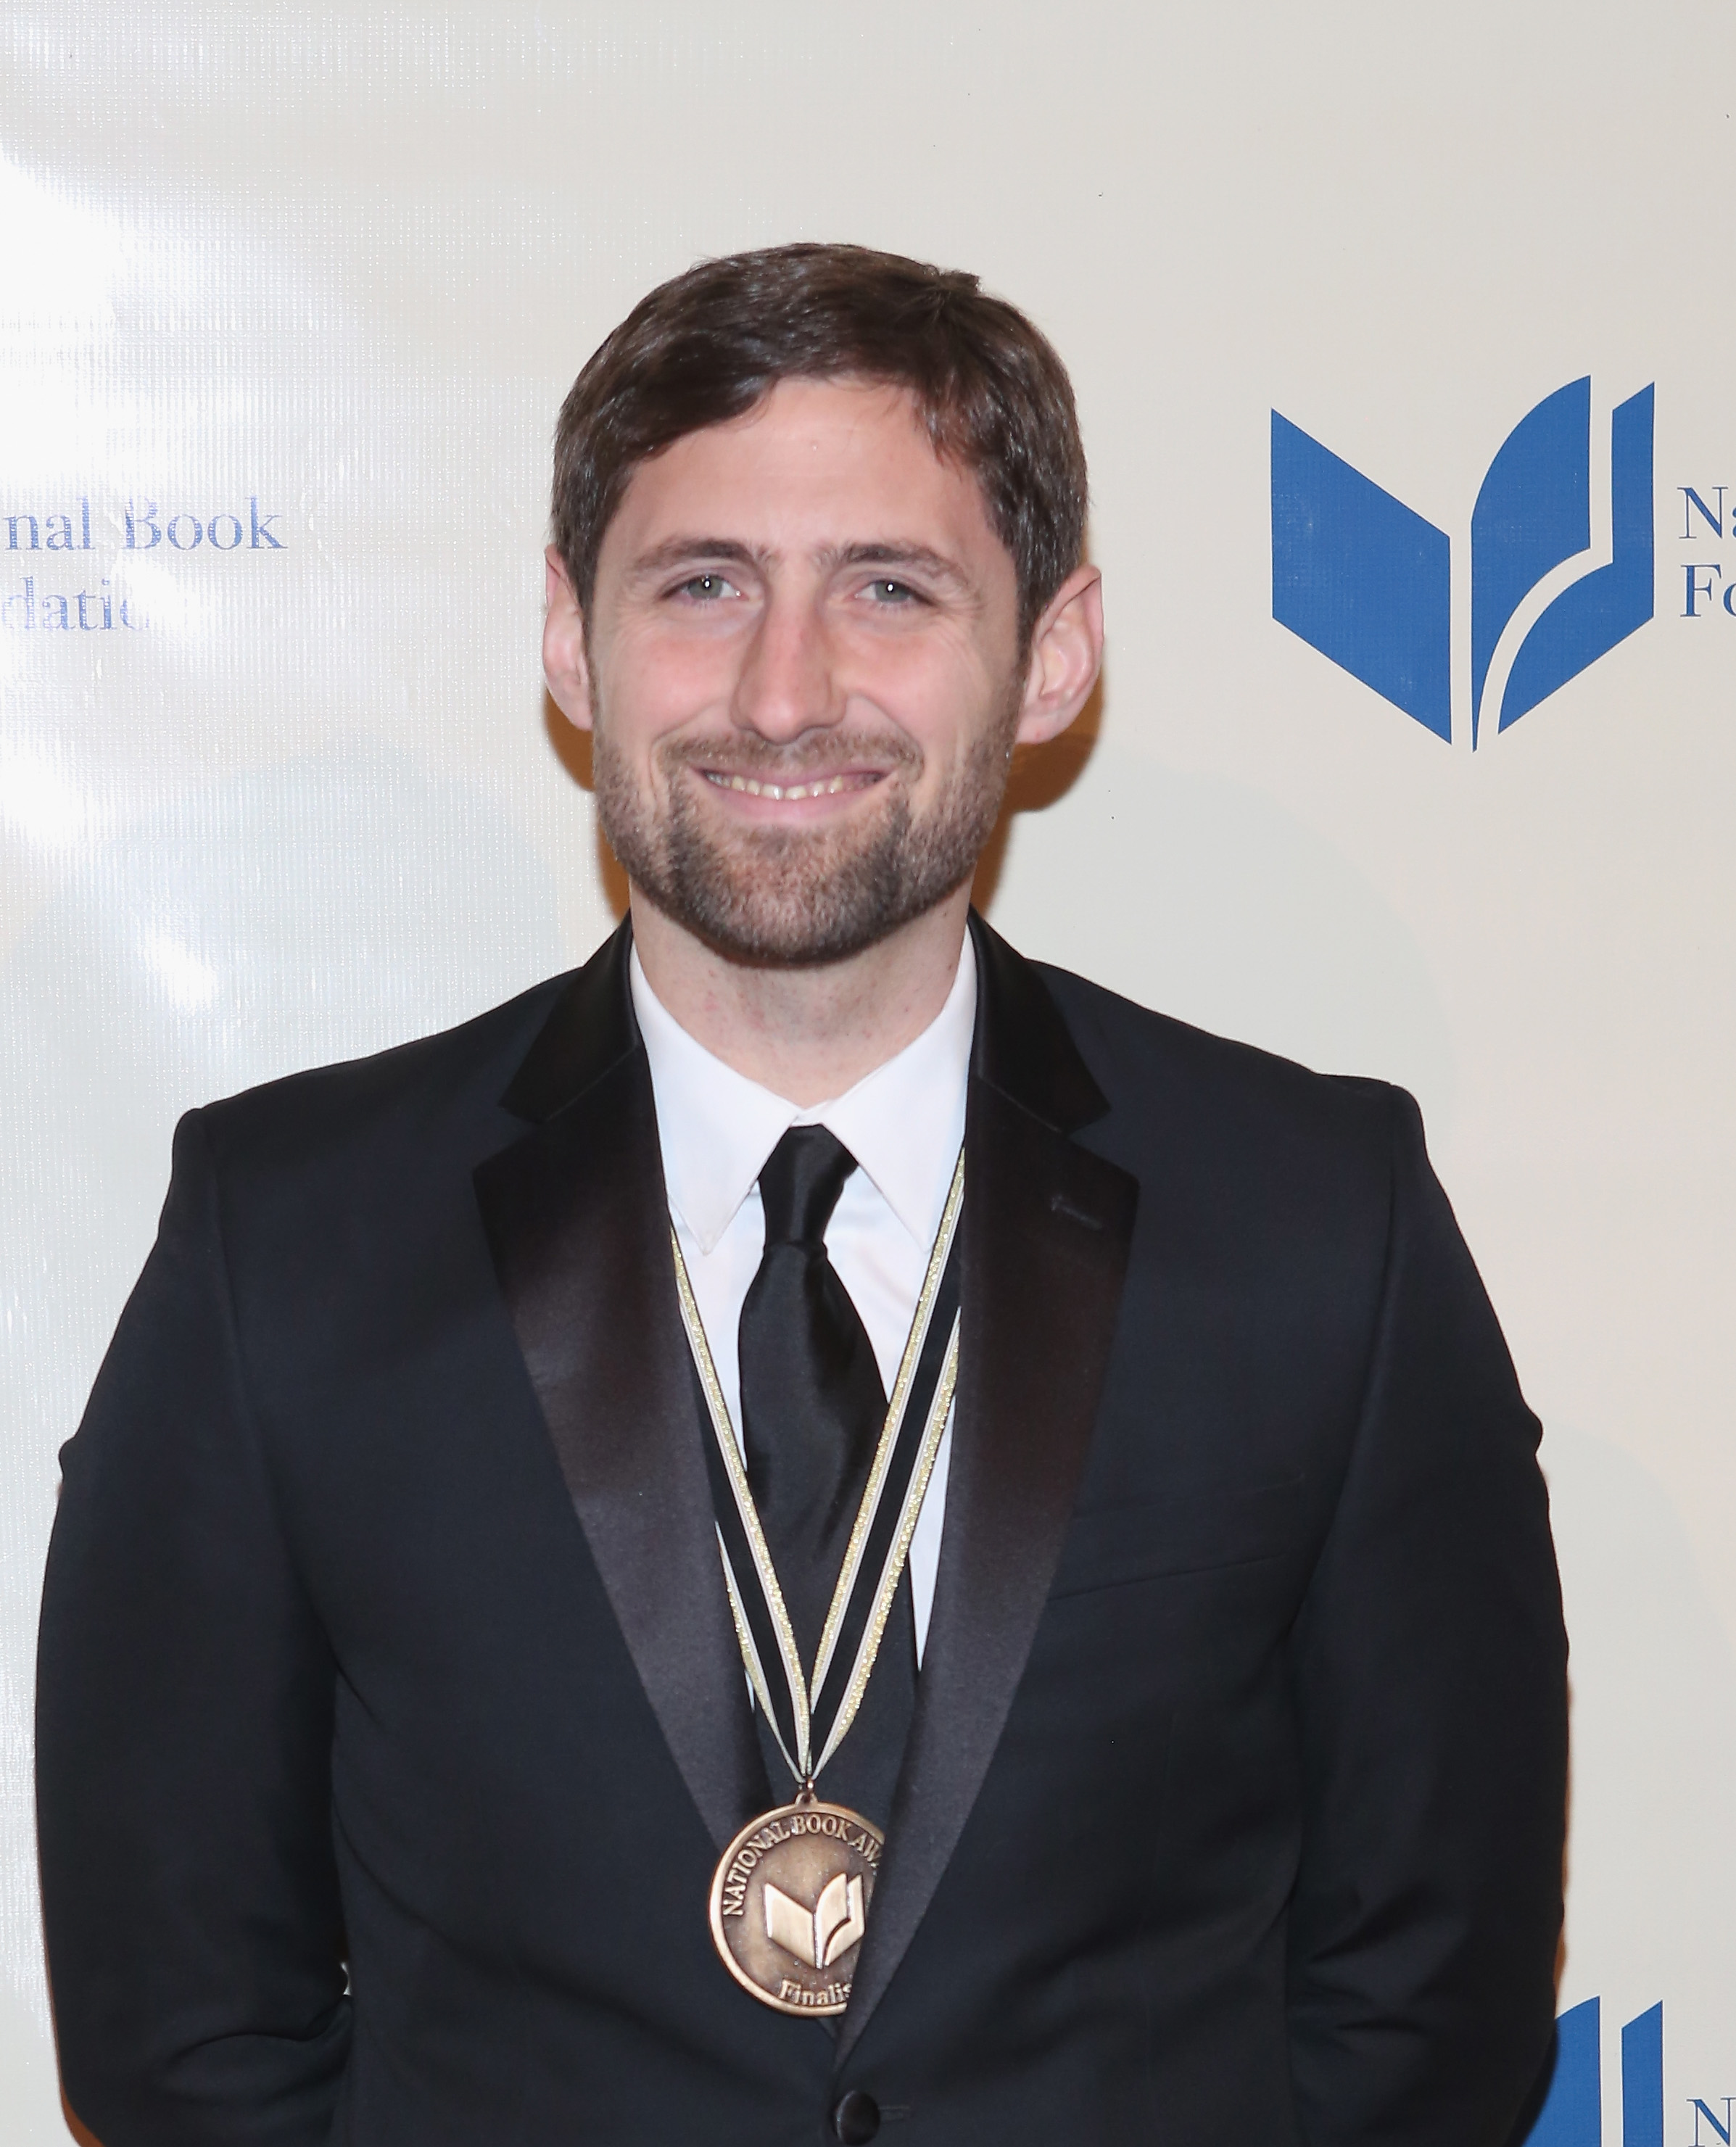 Phil Klay attends the National Book Awards on Nov. 19, 2014 in New York City.